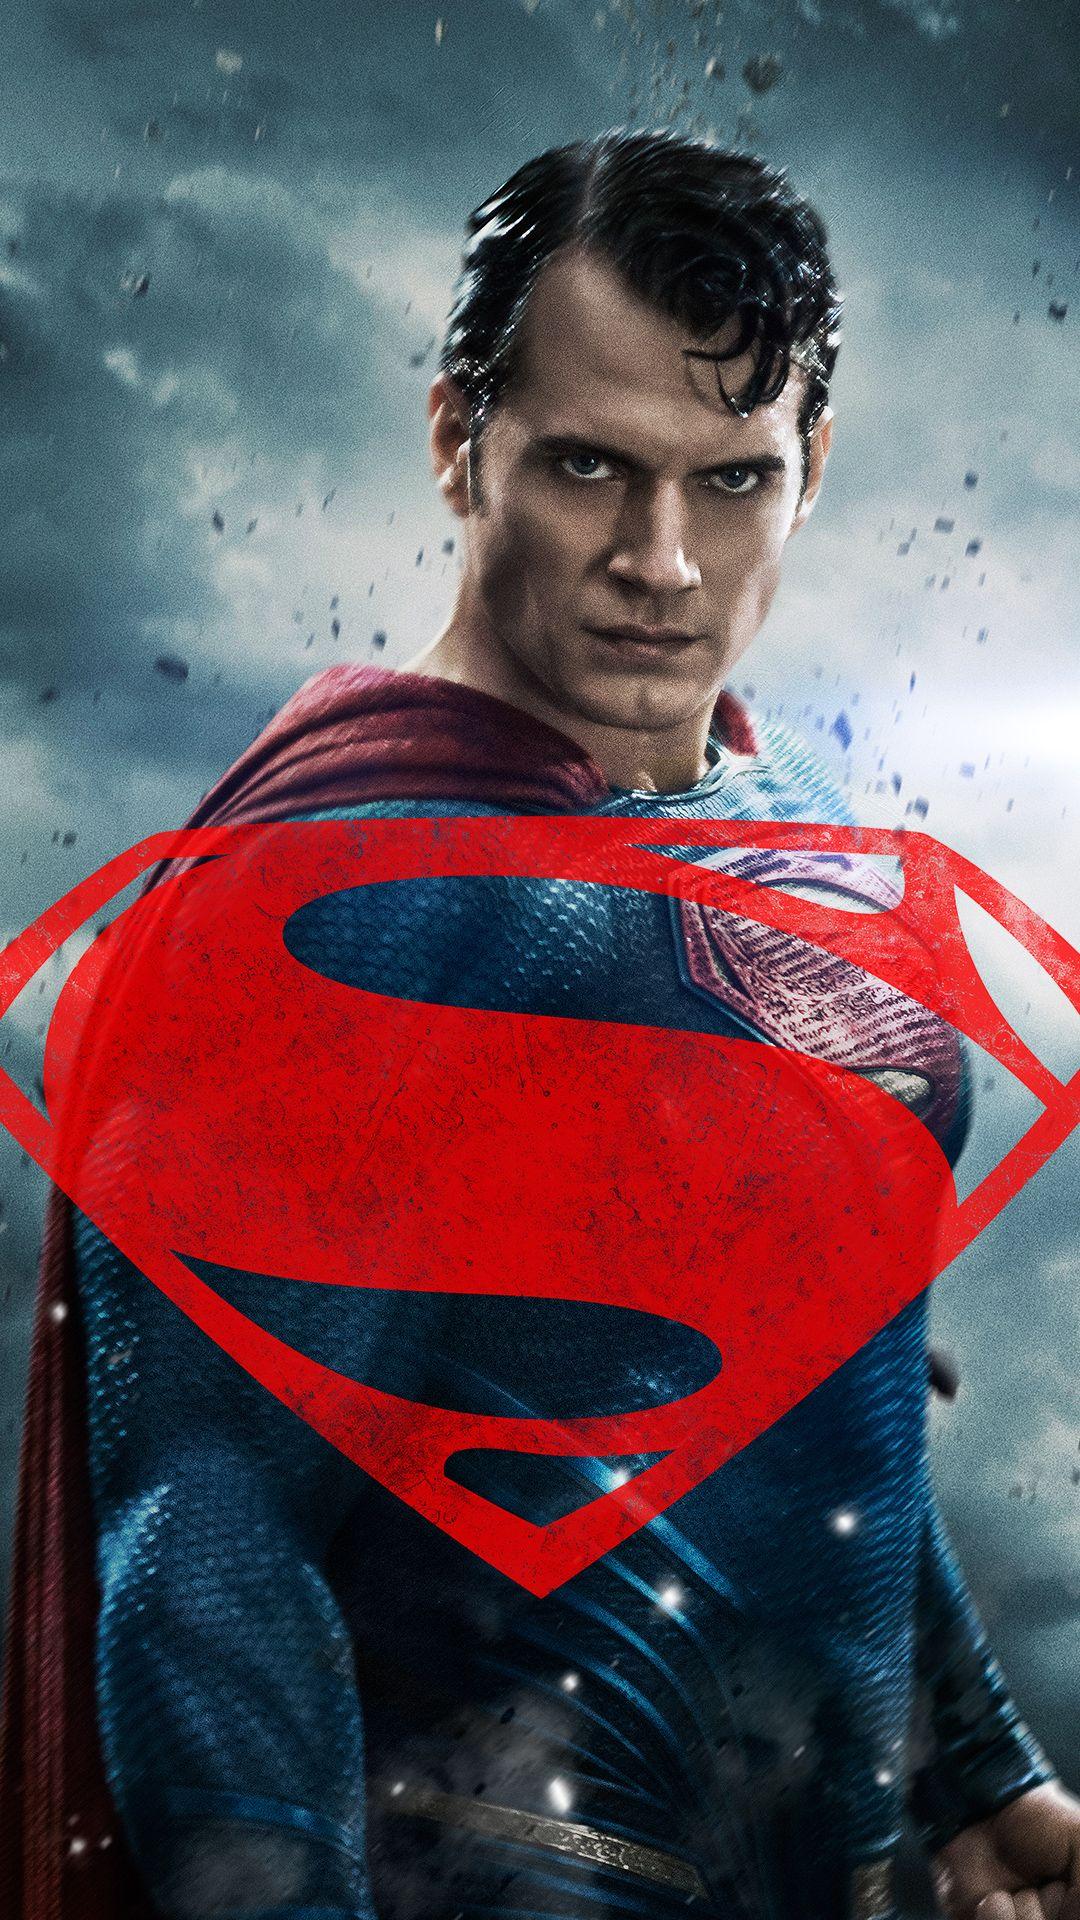 vs Superman Henry Cavill Android Wallpaper free download